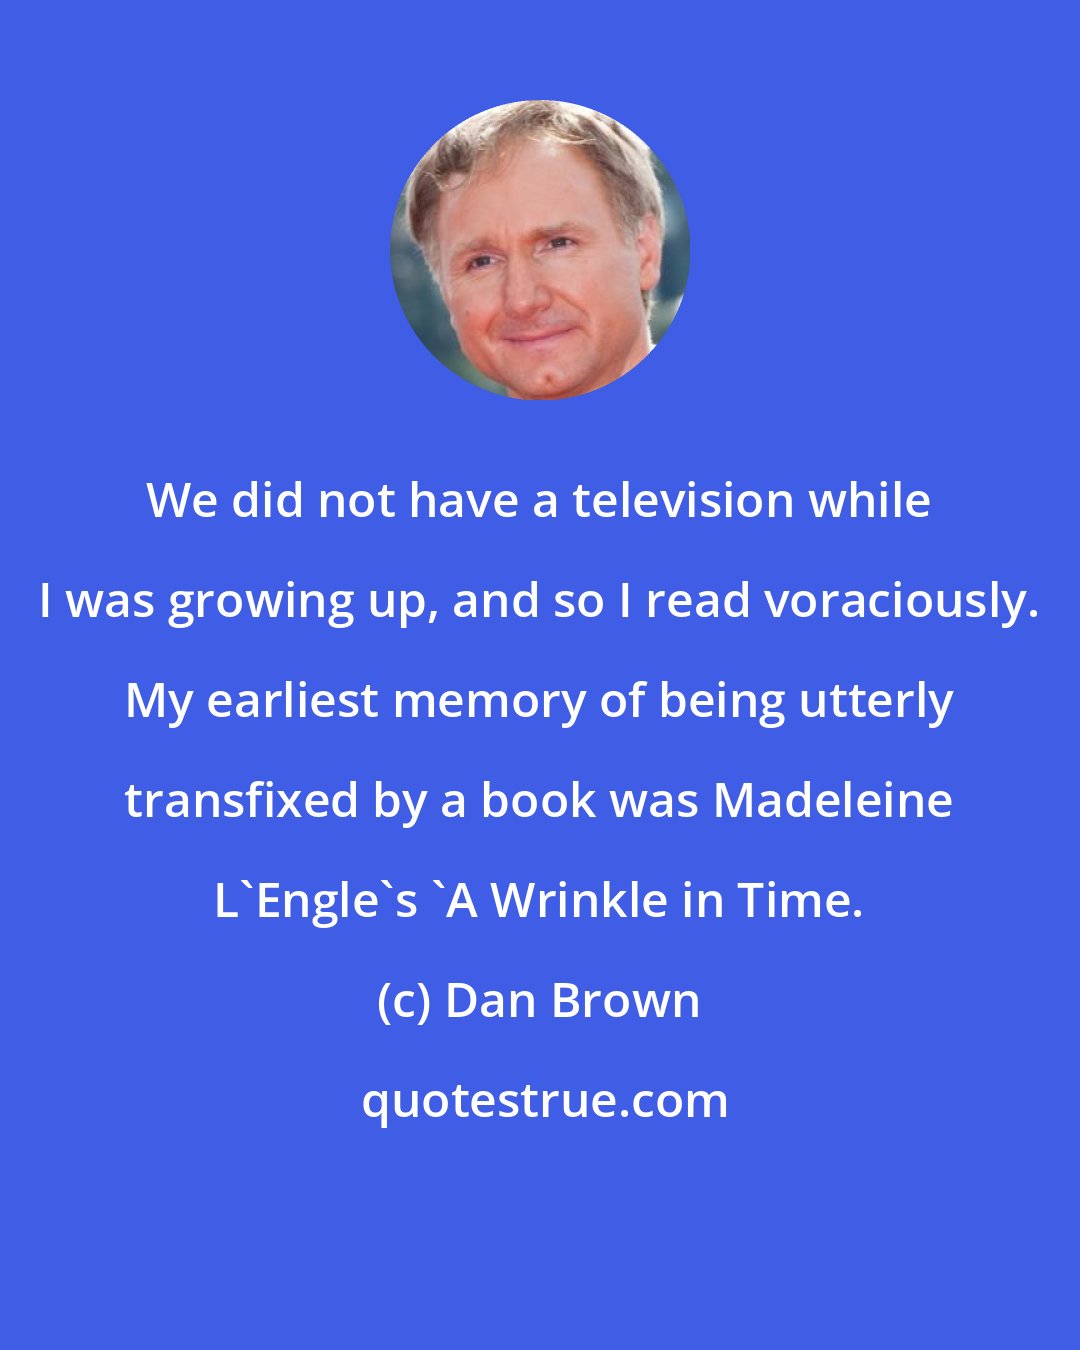 Dan Brown: We did not have a television while I was growing up, and so I read voraciously. My earliest memory of being utterly transfixed by a book was Madeleine L'Engle's 'A Wrinkle in Time.